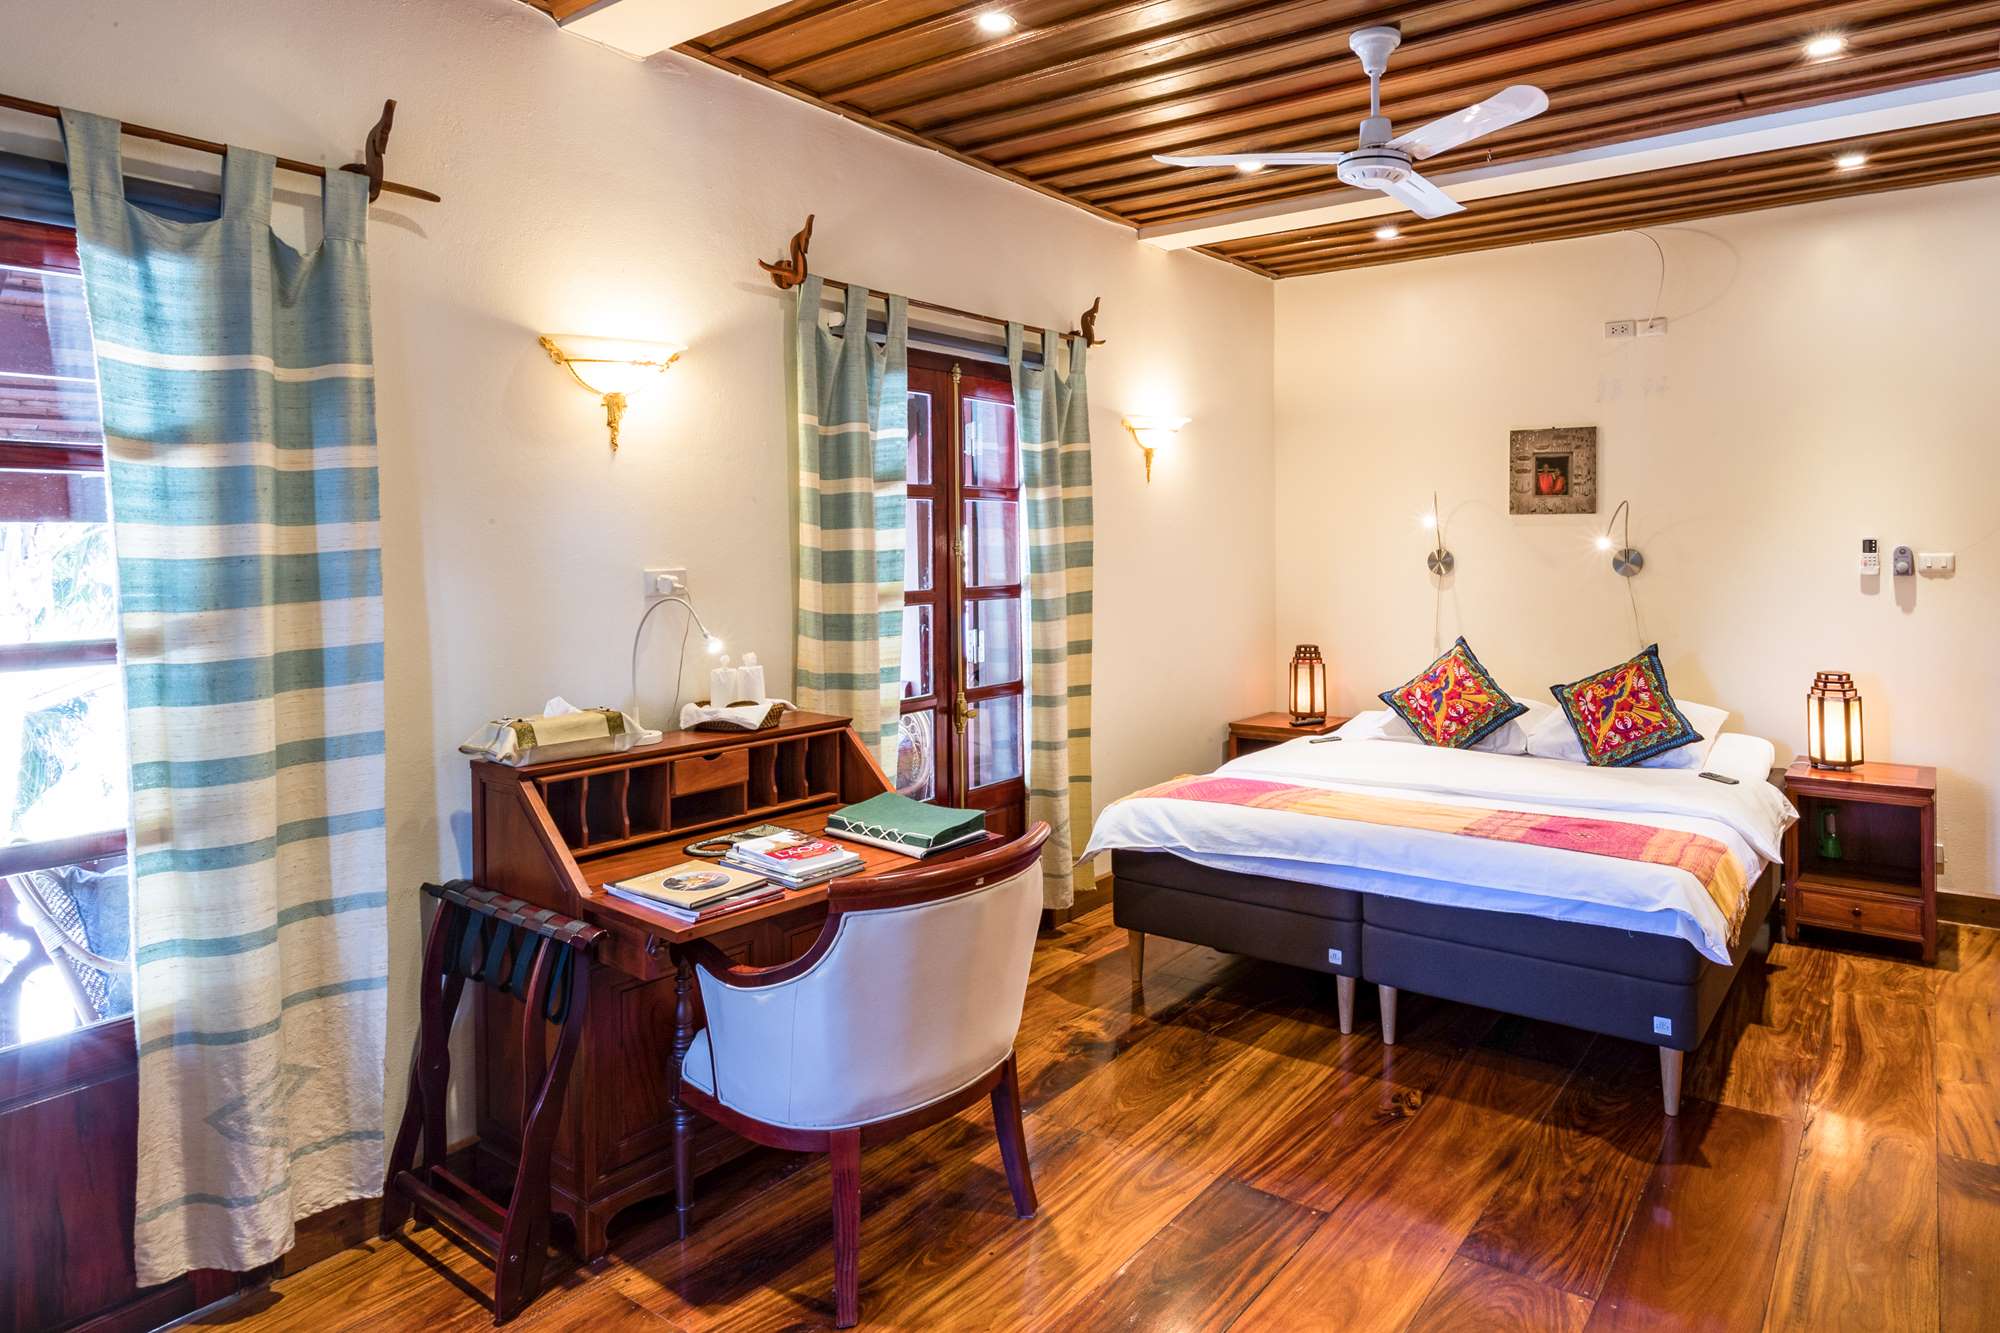 Deluxe Room (Riverview): Antique furniture and traditional Lao style cushions